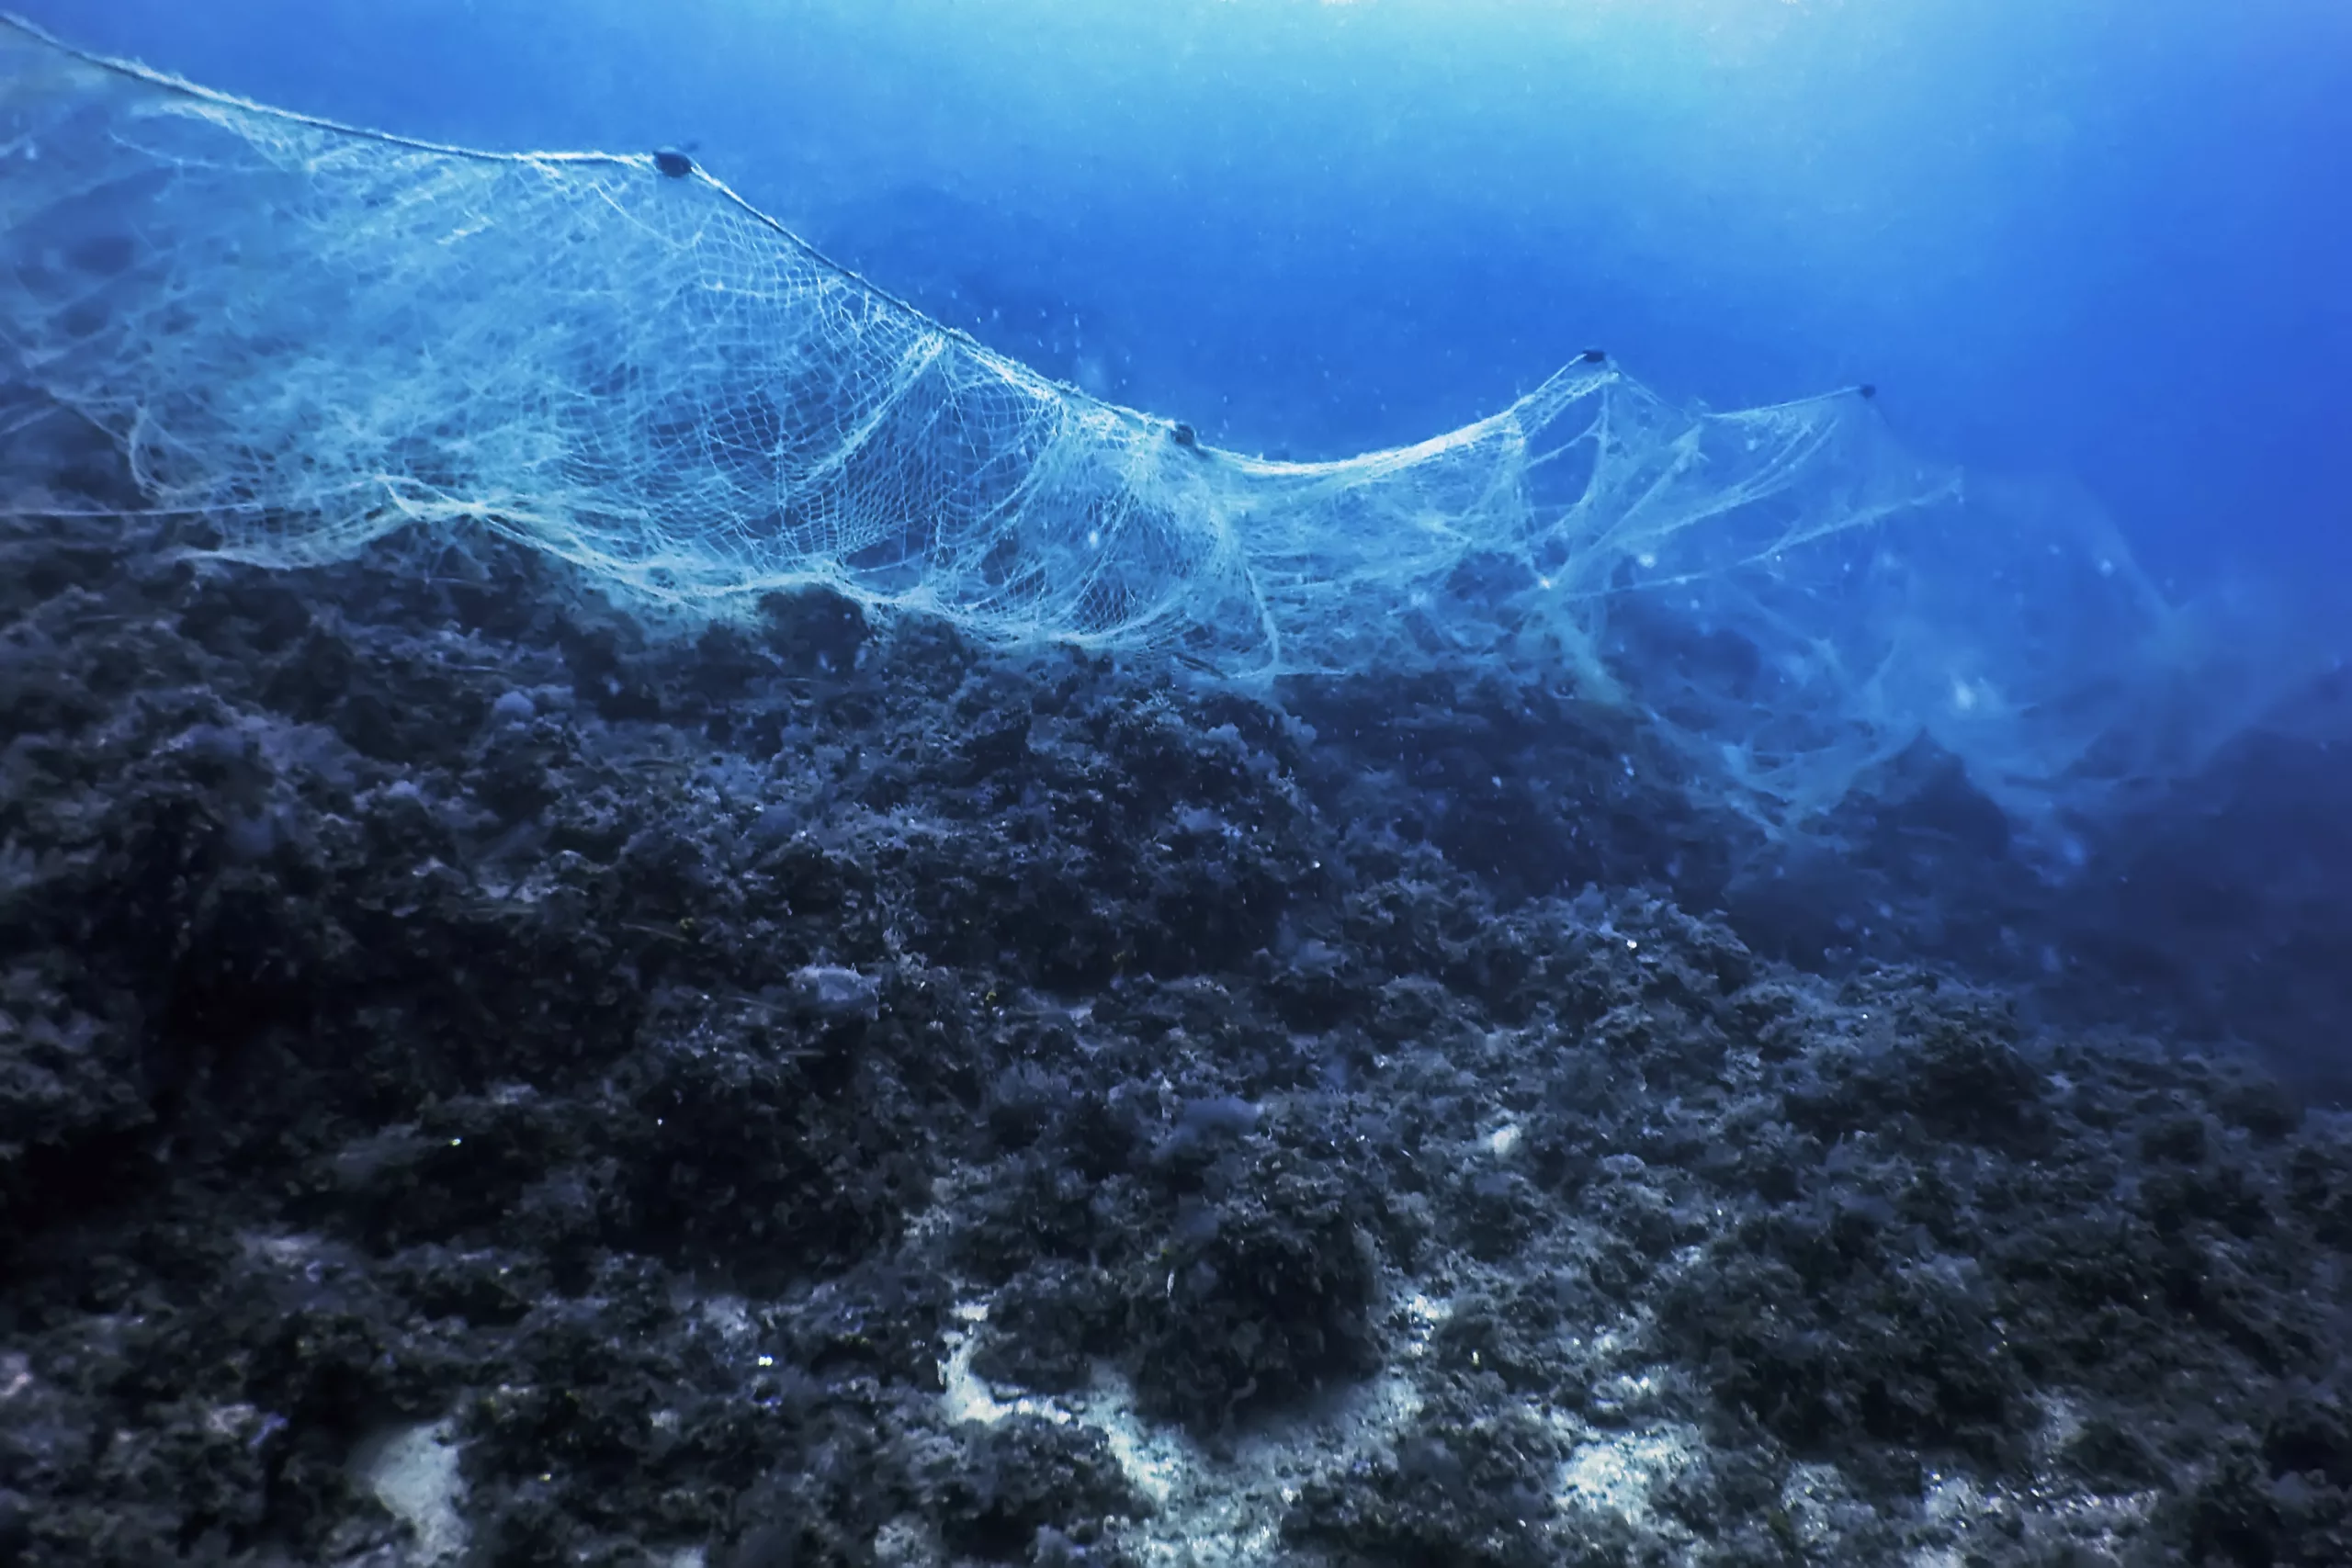 A fishing net underwater fixed on the seabed, deep water